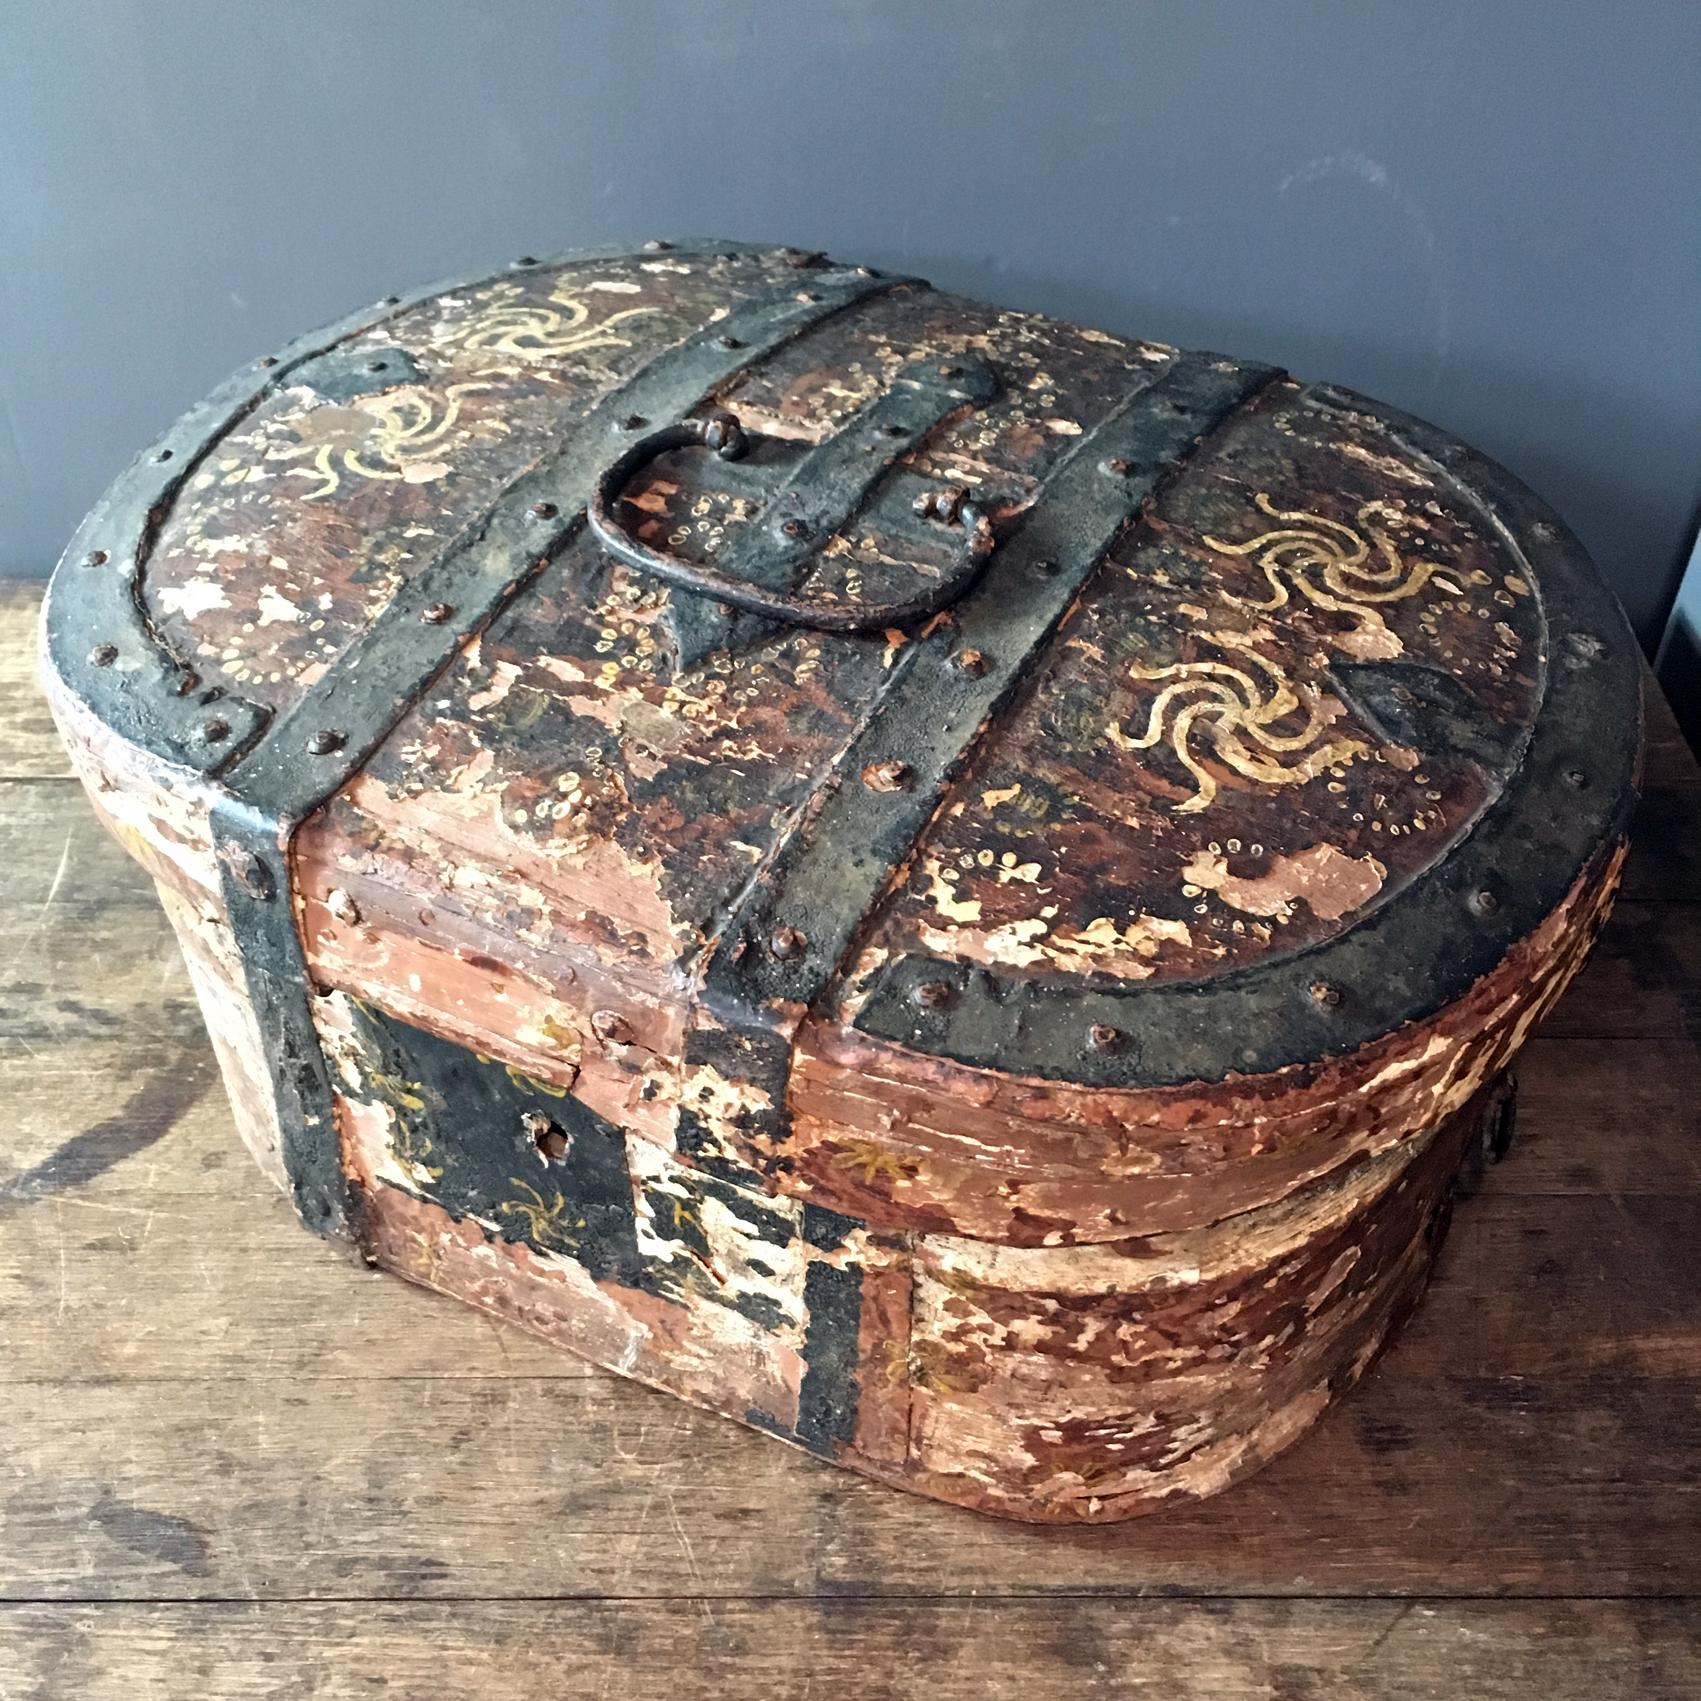 Late 18th century Swedish bridal box
Originally for bridal trinkets and finery, keepsakes and gifts
Beautiful aged box with hinged lid
All original metal strap work and handles
This is a very old item so age related wear and use can be seen
The